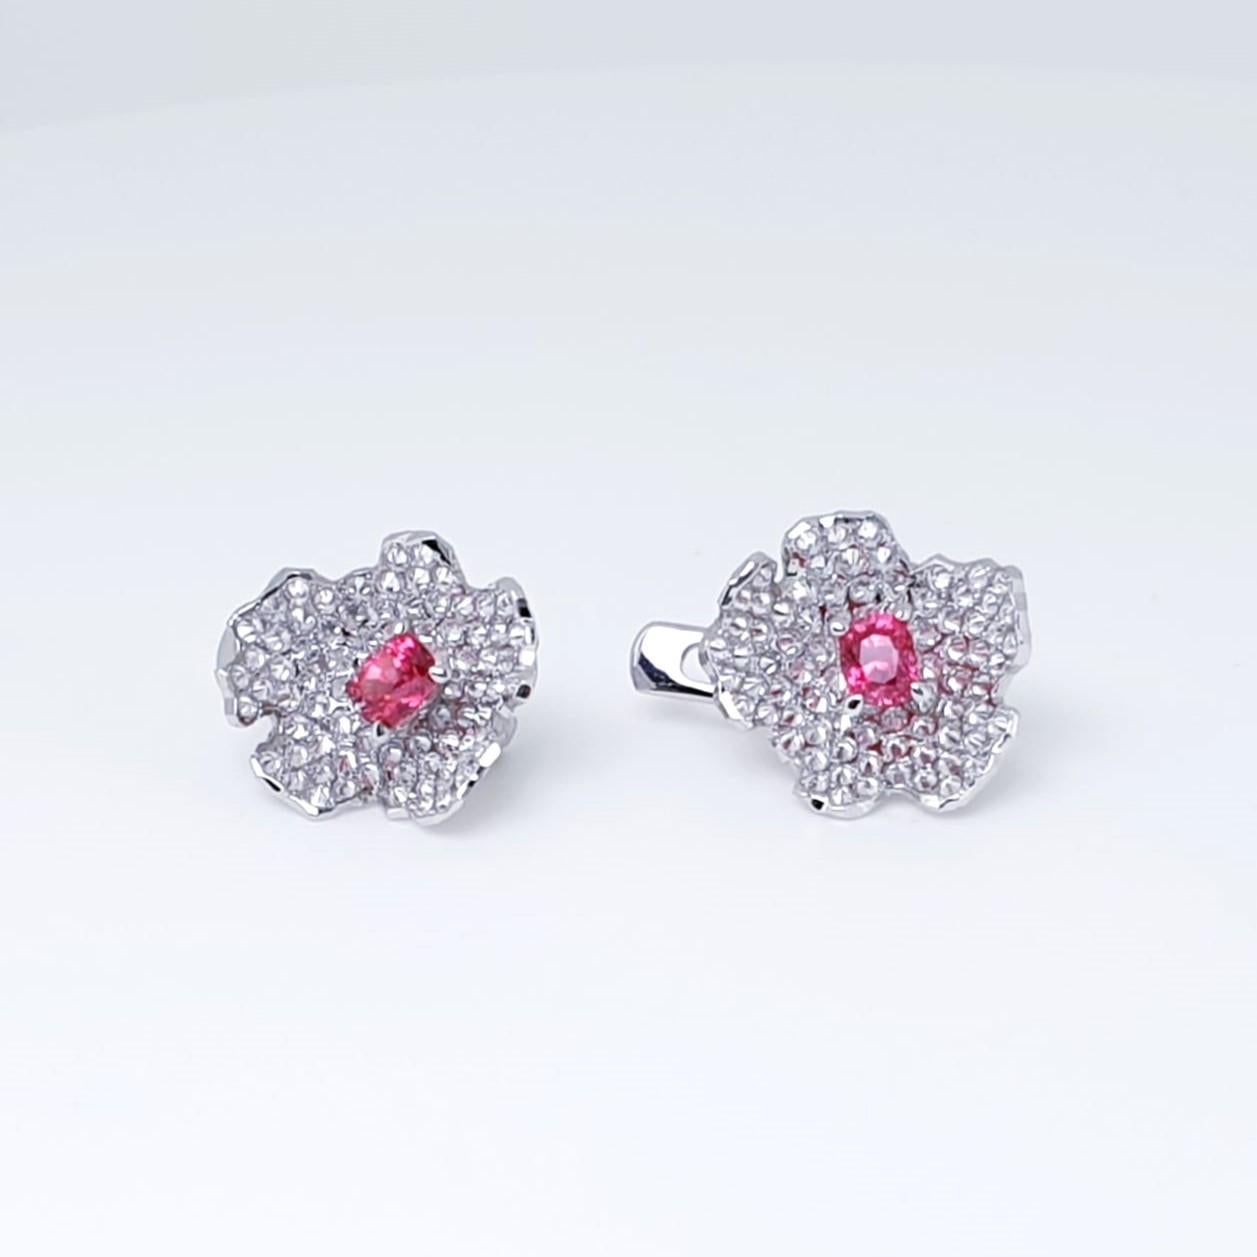 
In the shimmer of diamonds, a story unfolds,
Miracle of neon pink, a charm to adore.

MOISEIKIN's captivating Neon Pink Spinel Earrings are a tribute to this year's vibrant hues! The vibrant hue of rare pink spinels from Burma enhanced by reversed